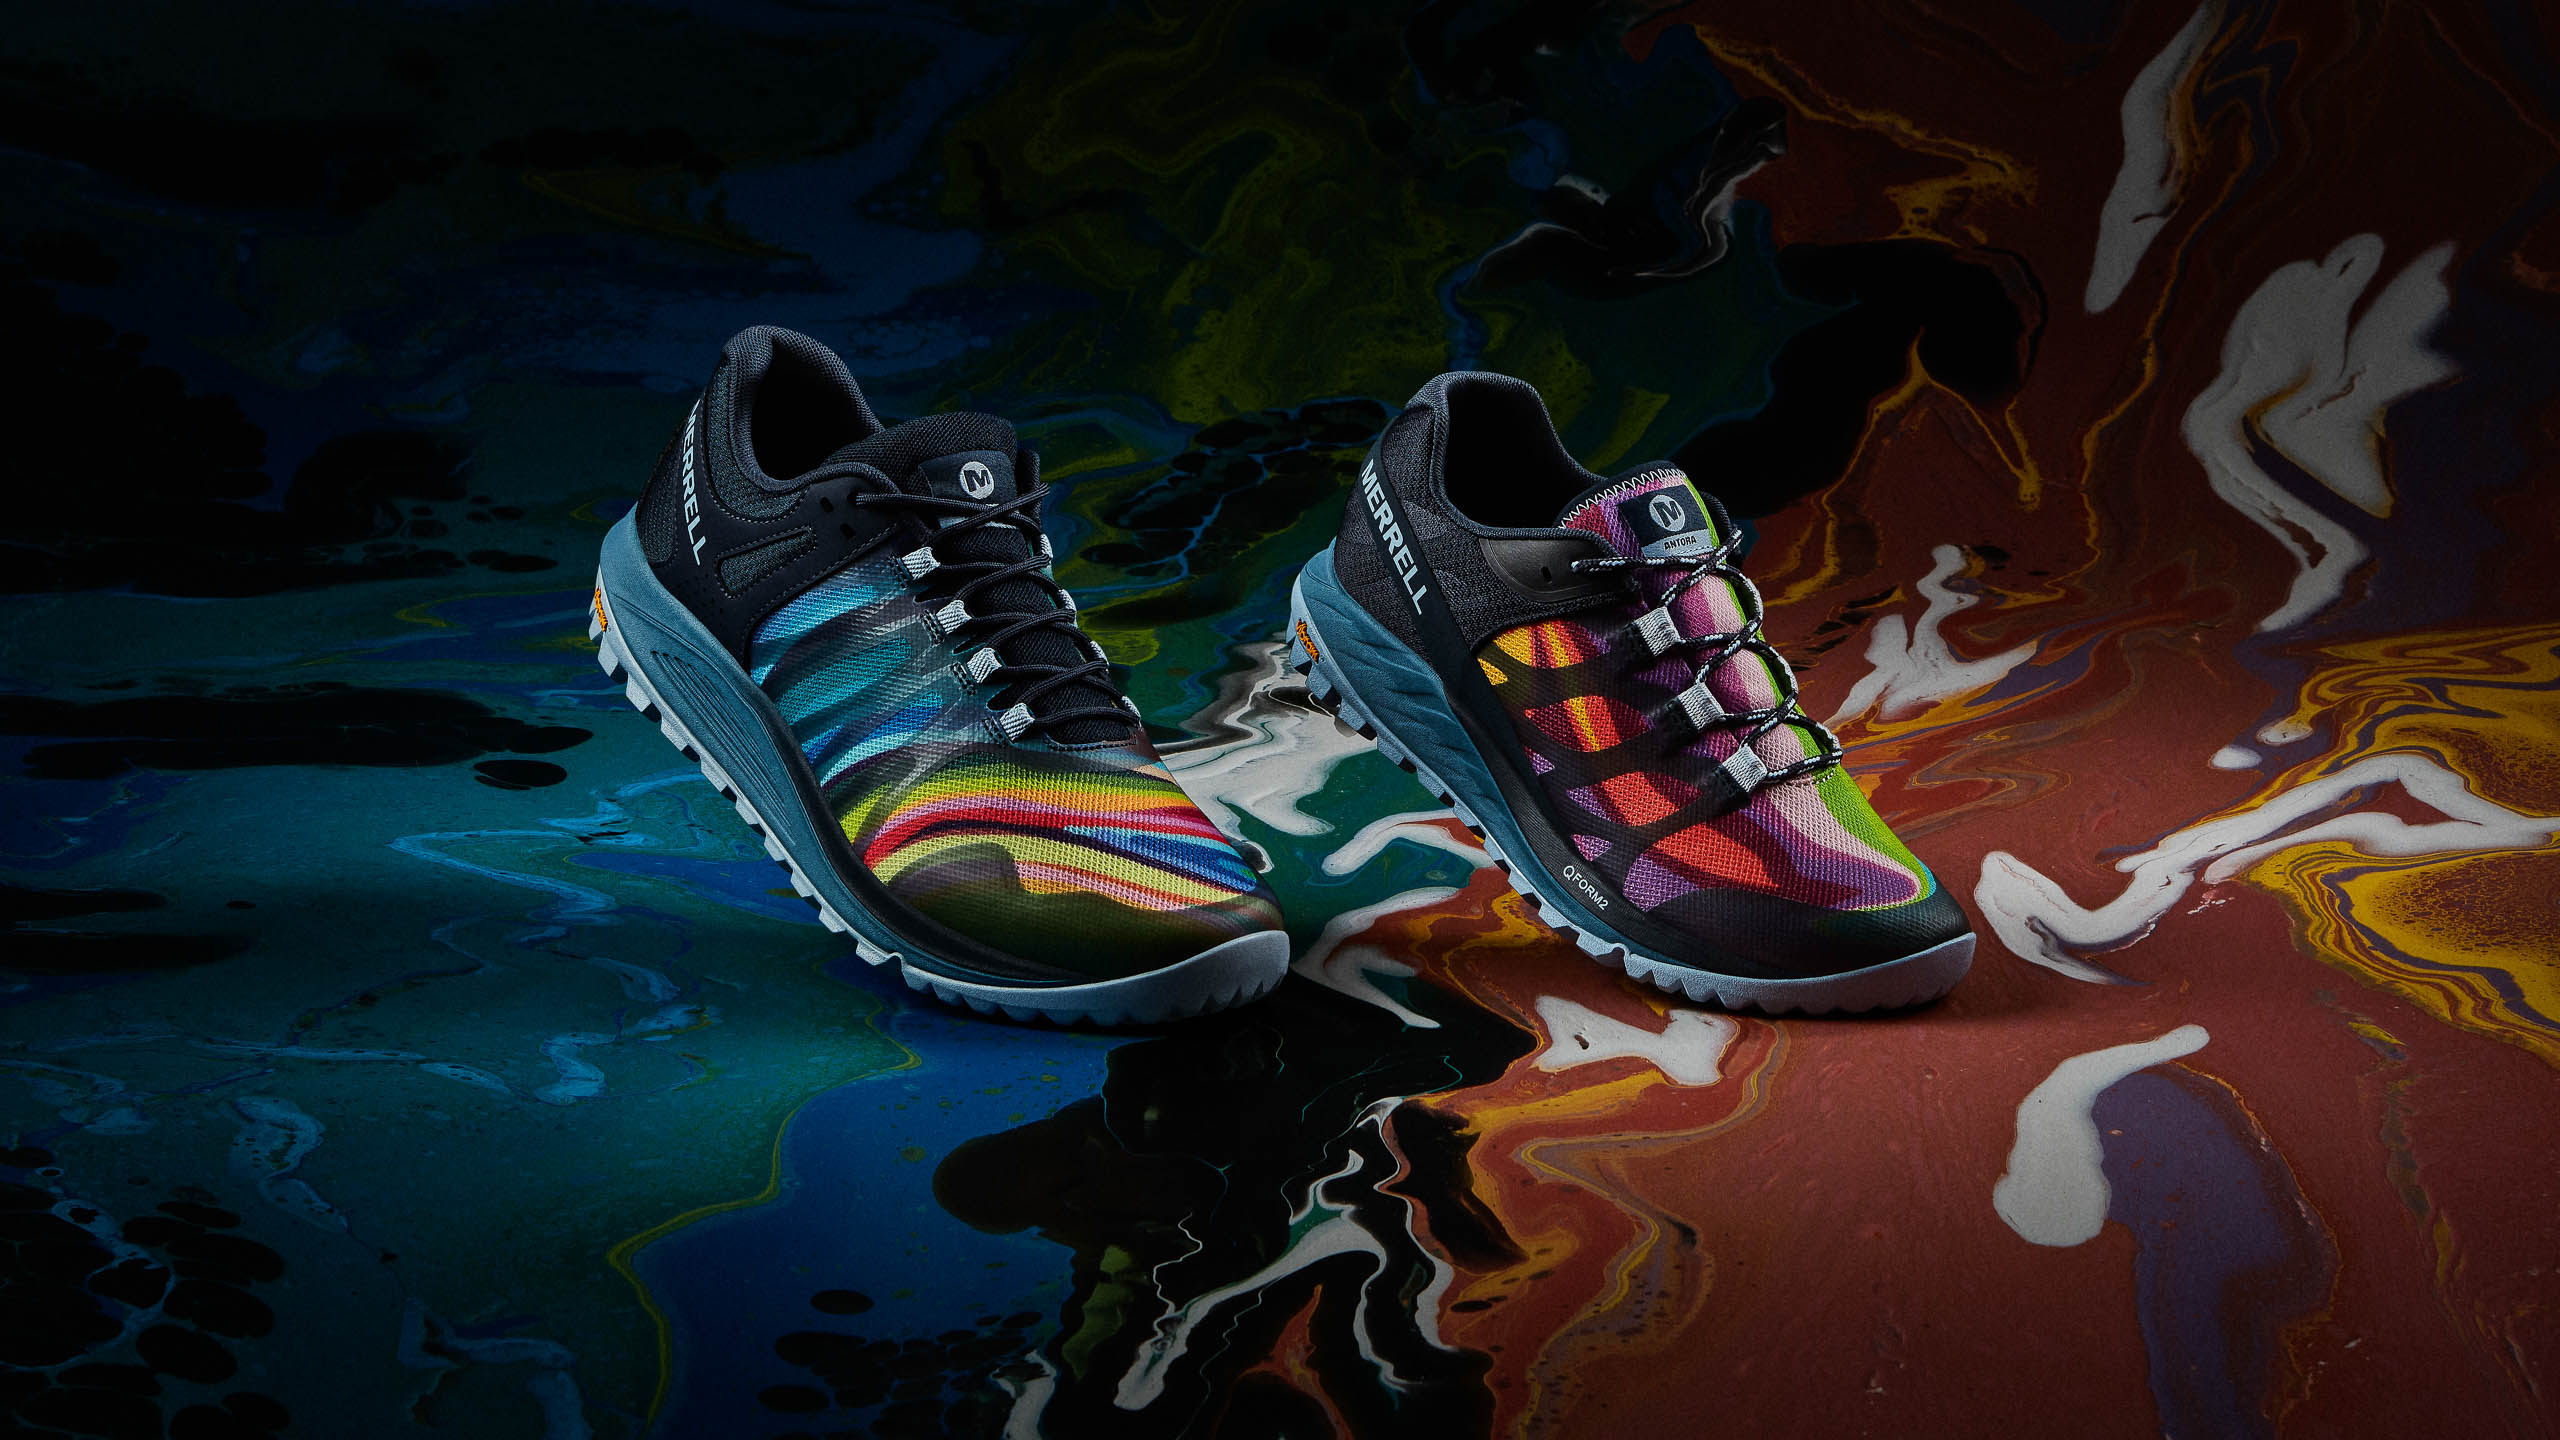 Merrell Nova and Antora inspired by the Painted Mountains